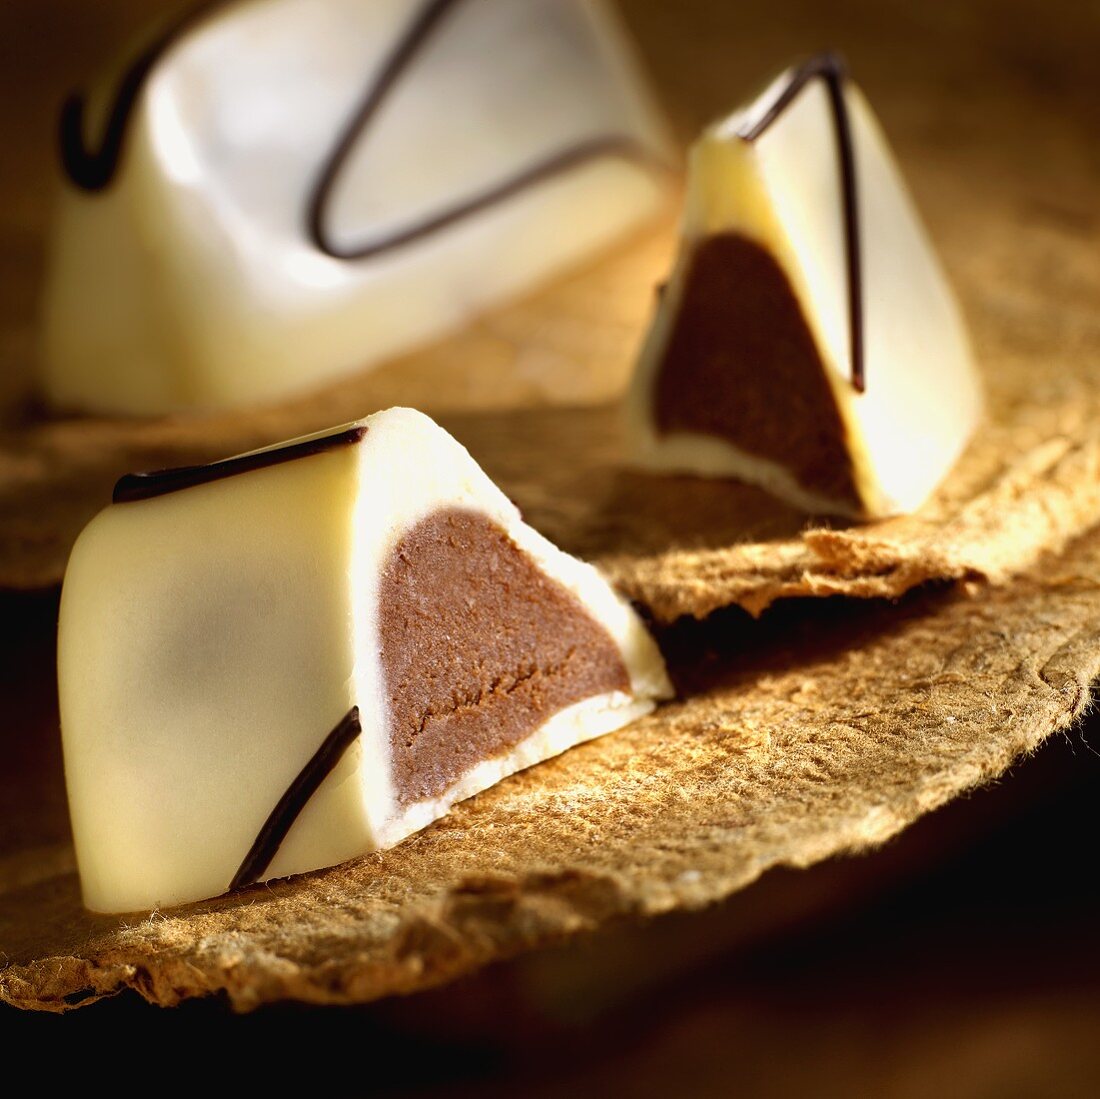 Whole and halved white chocolates